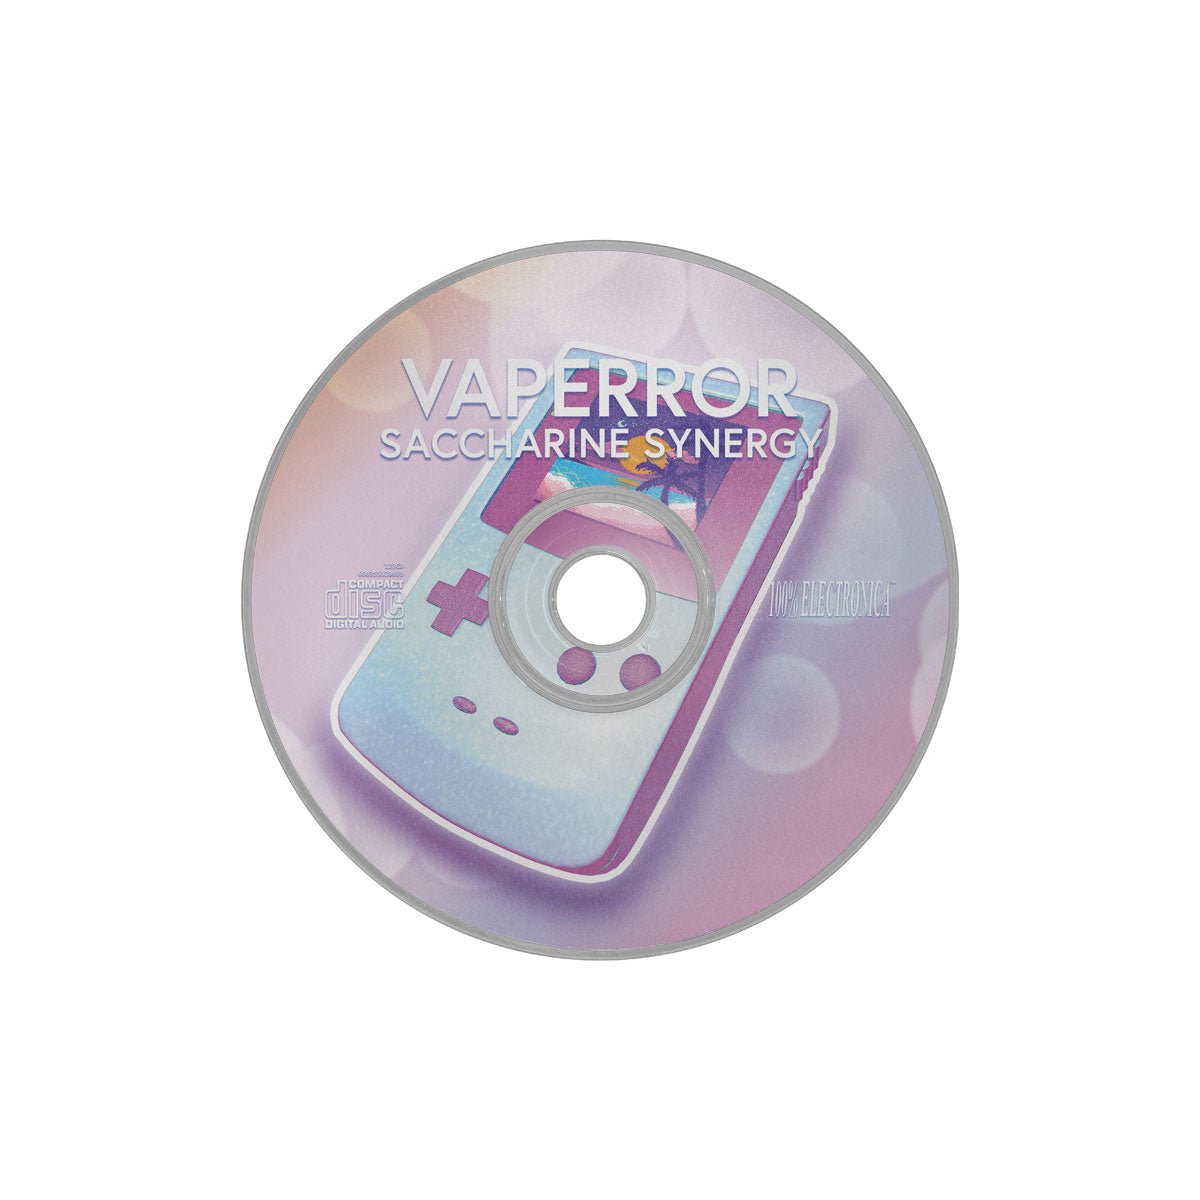 VAPERROR - Saccharine Synergy CD - 100% Electronica Official Store (Photo 2)